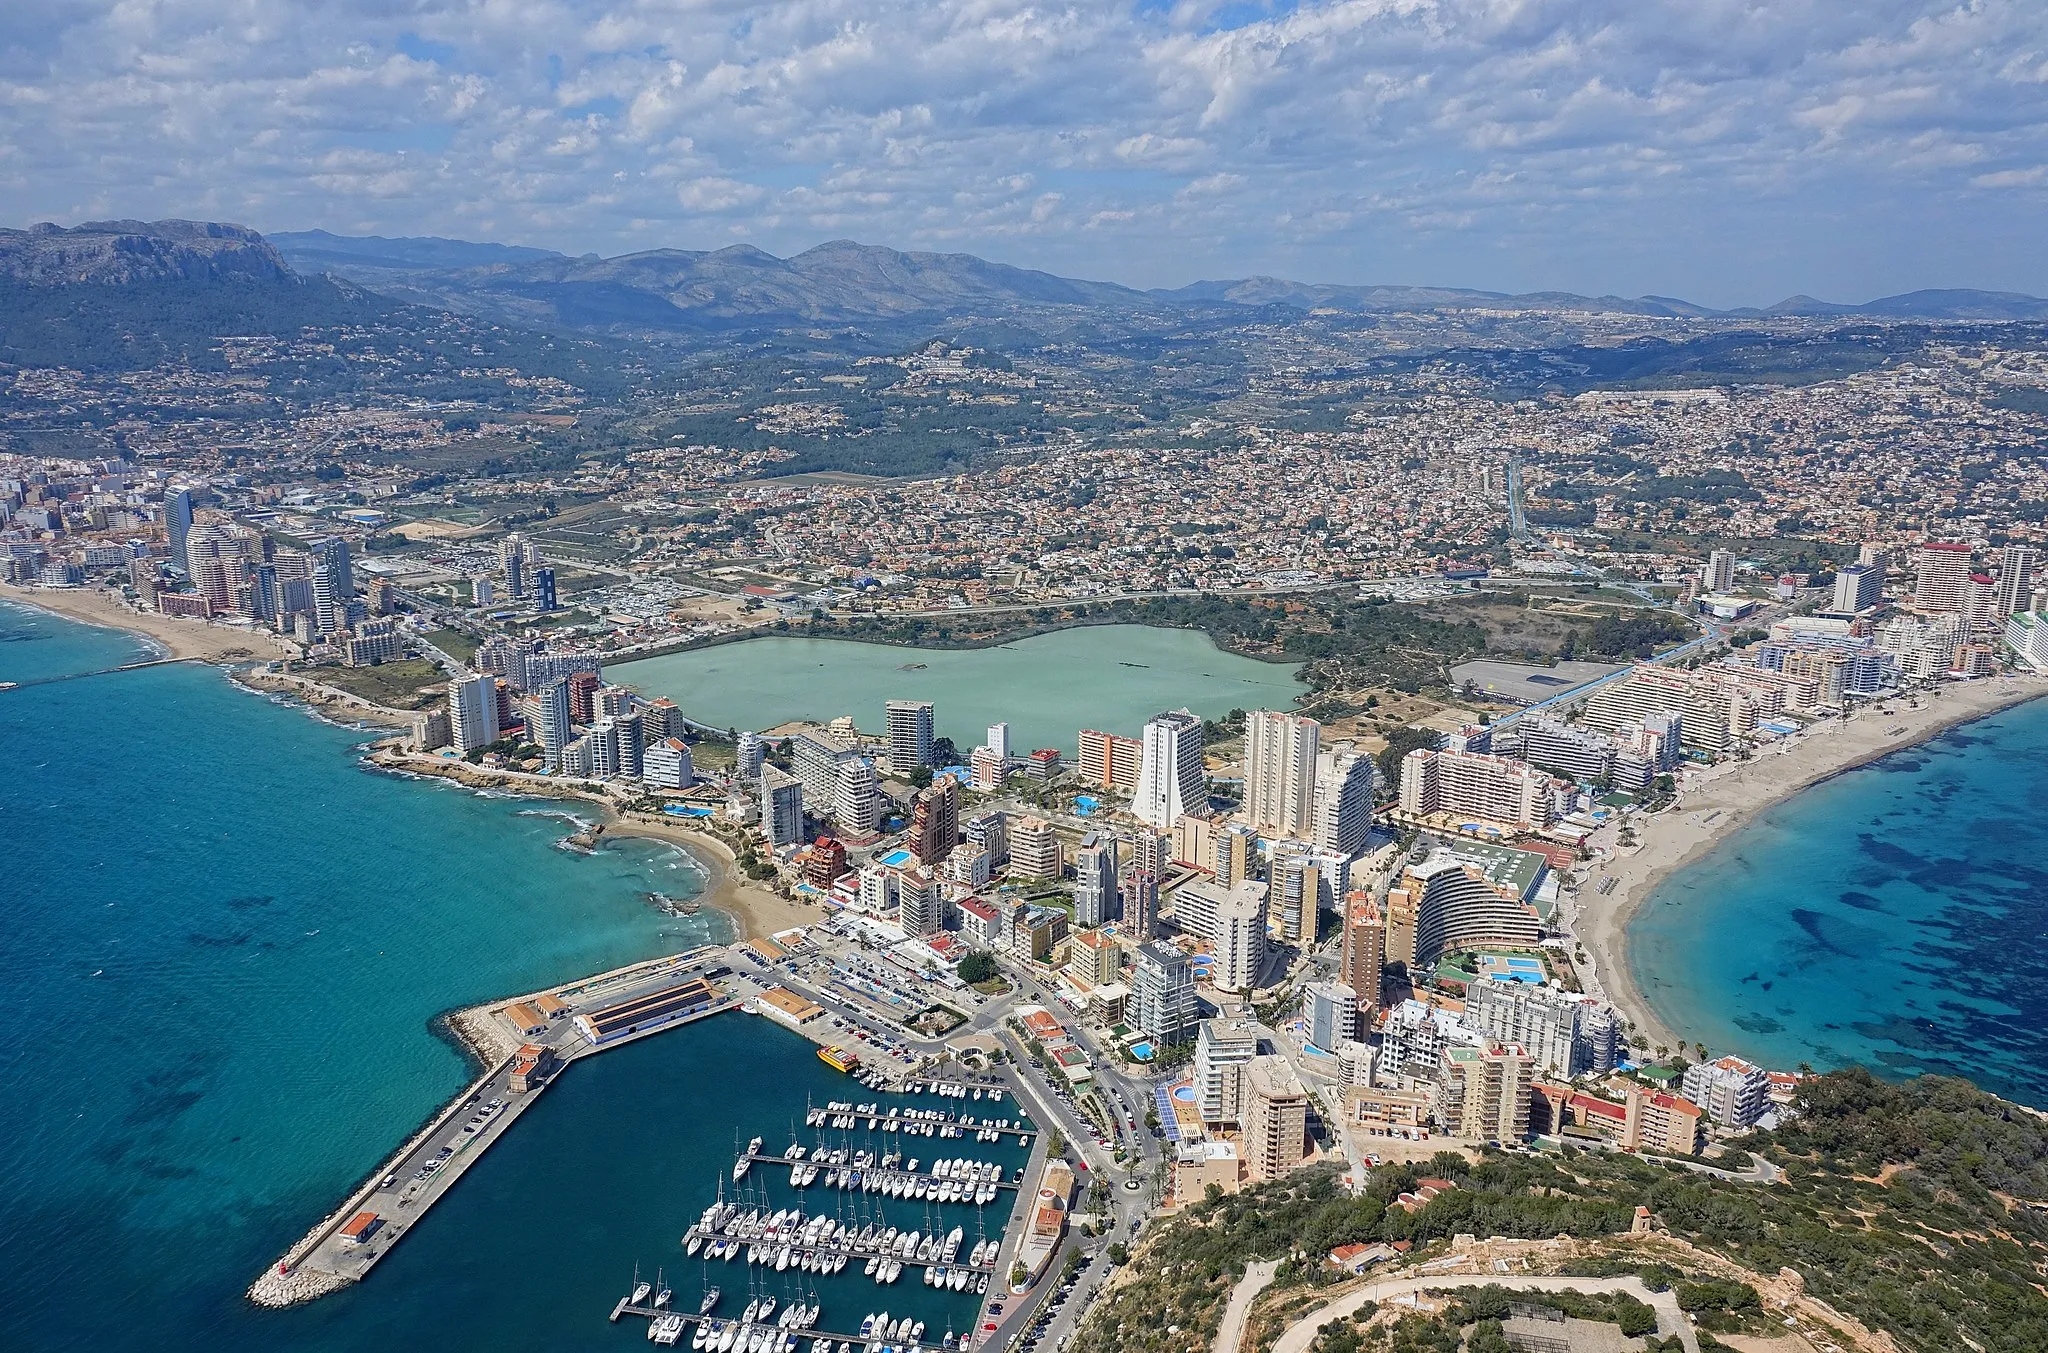 Photo showing: Calp as seen from the top of the Pico de peñón de Ifach, a tall cliff south-east of the town.